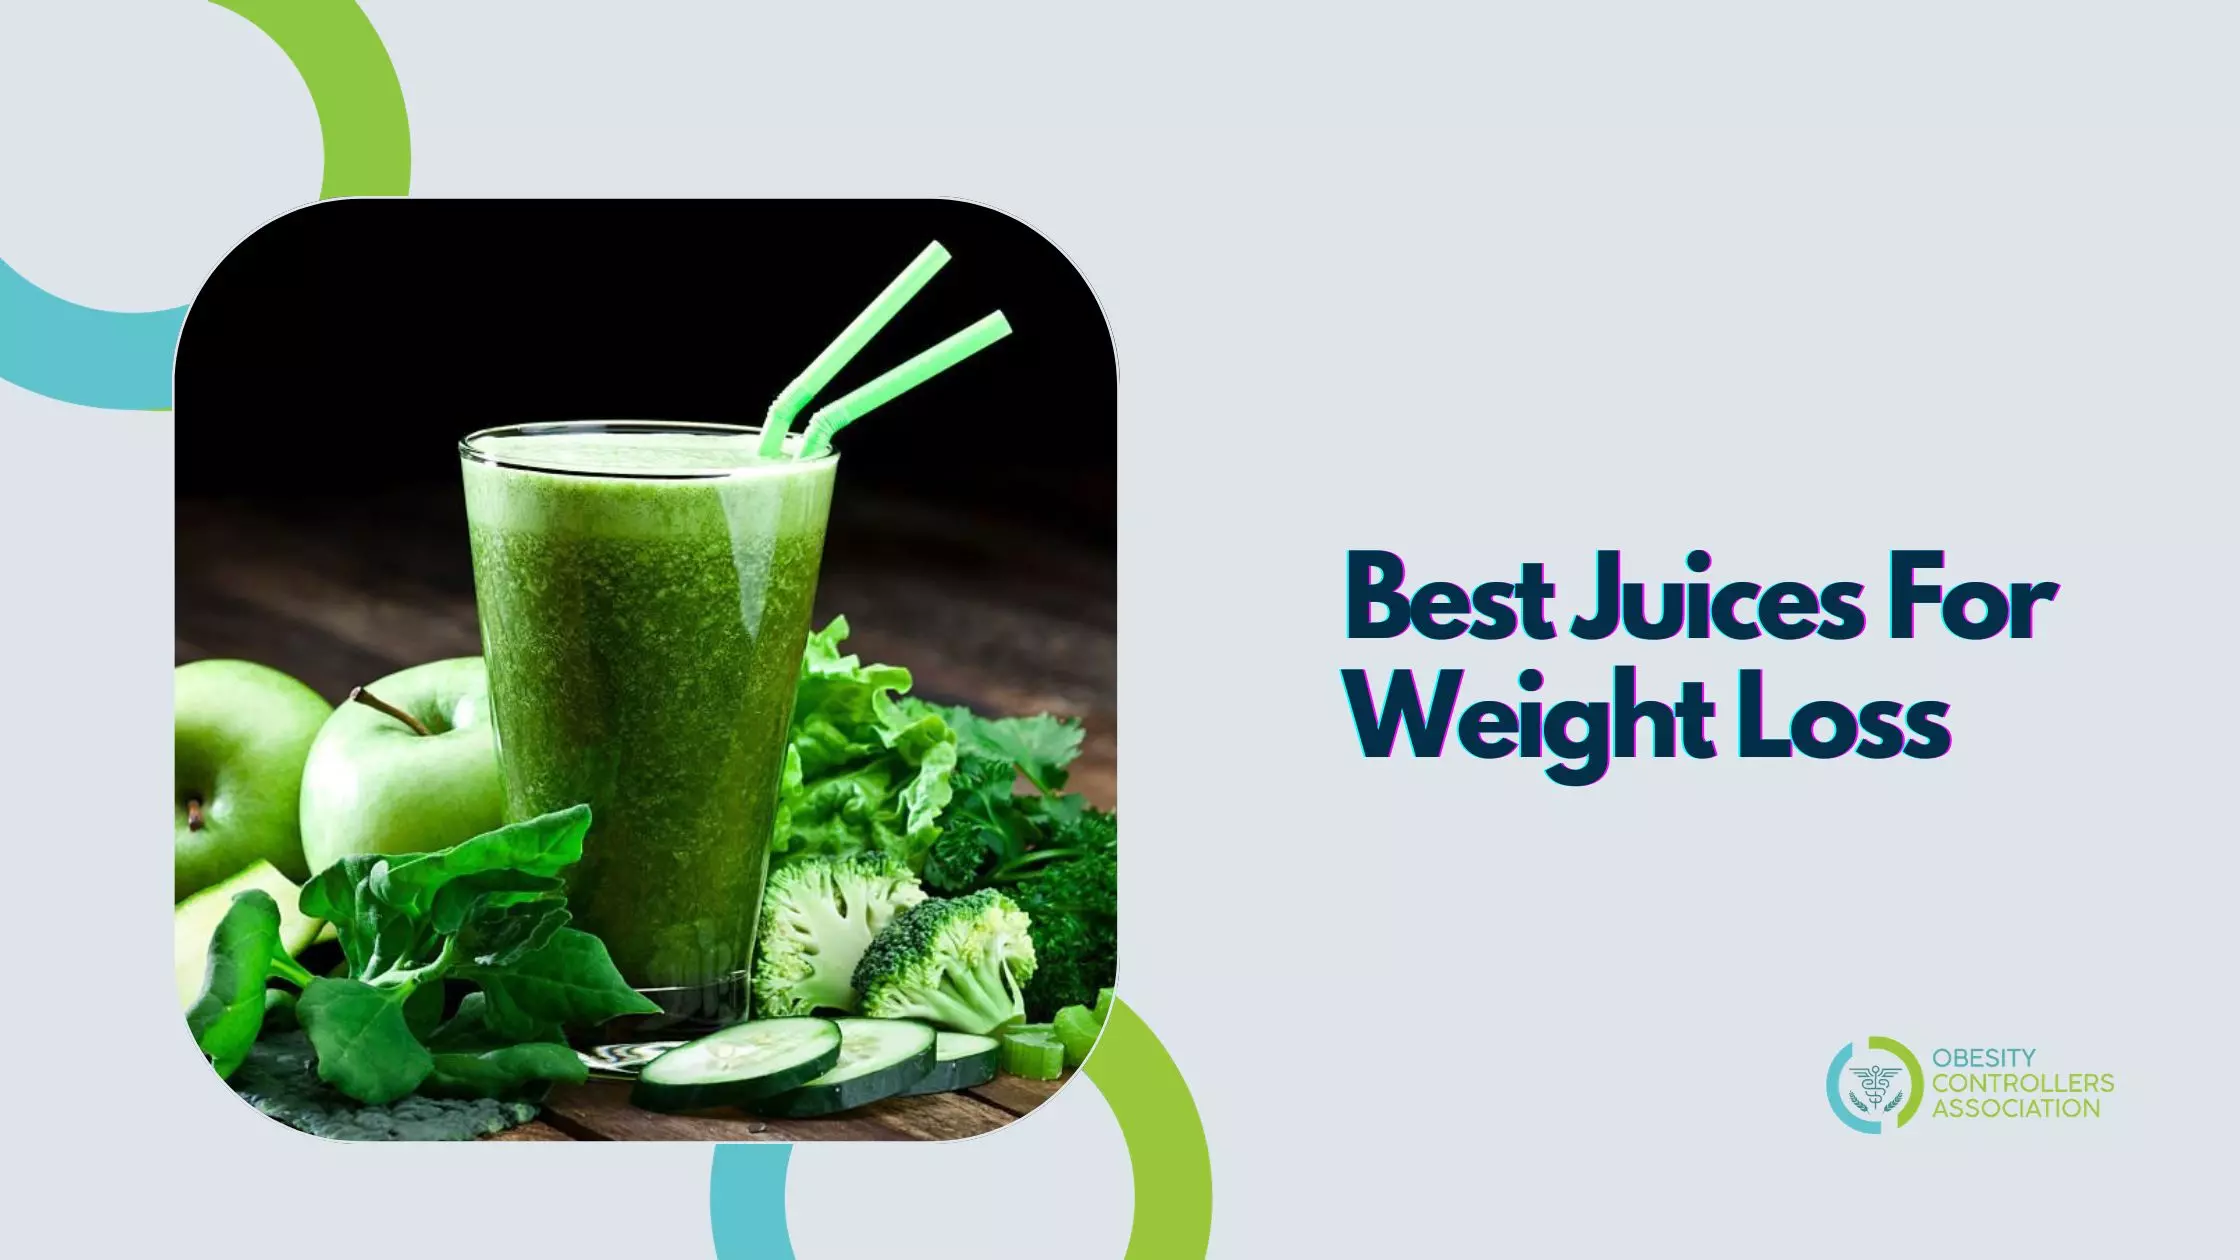 Best Juices For Weight Loss